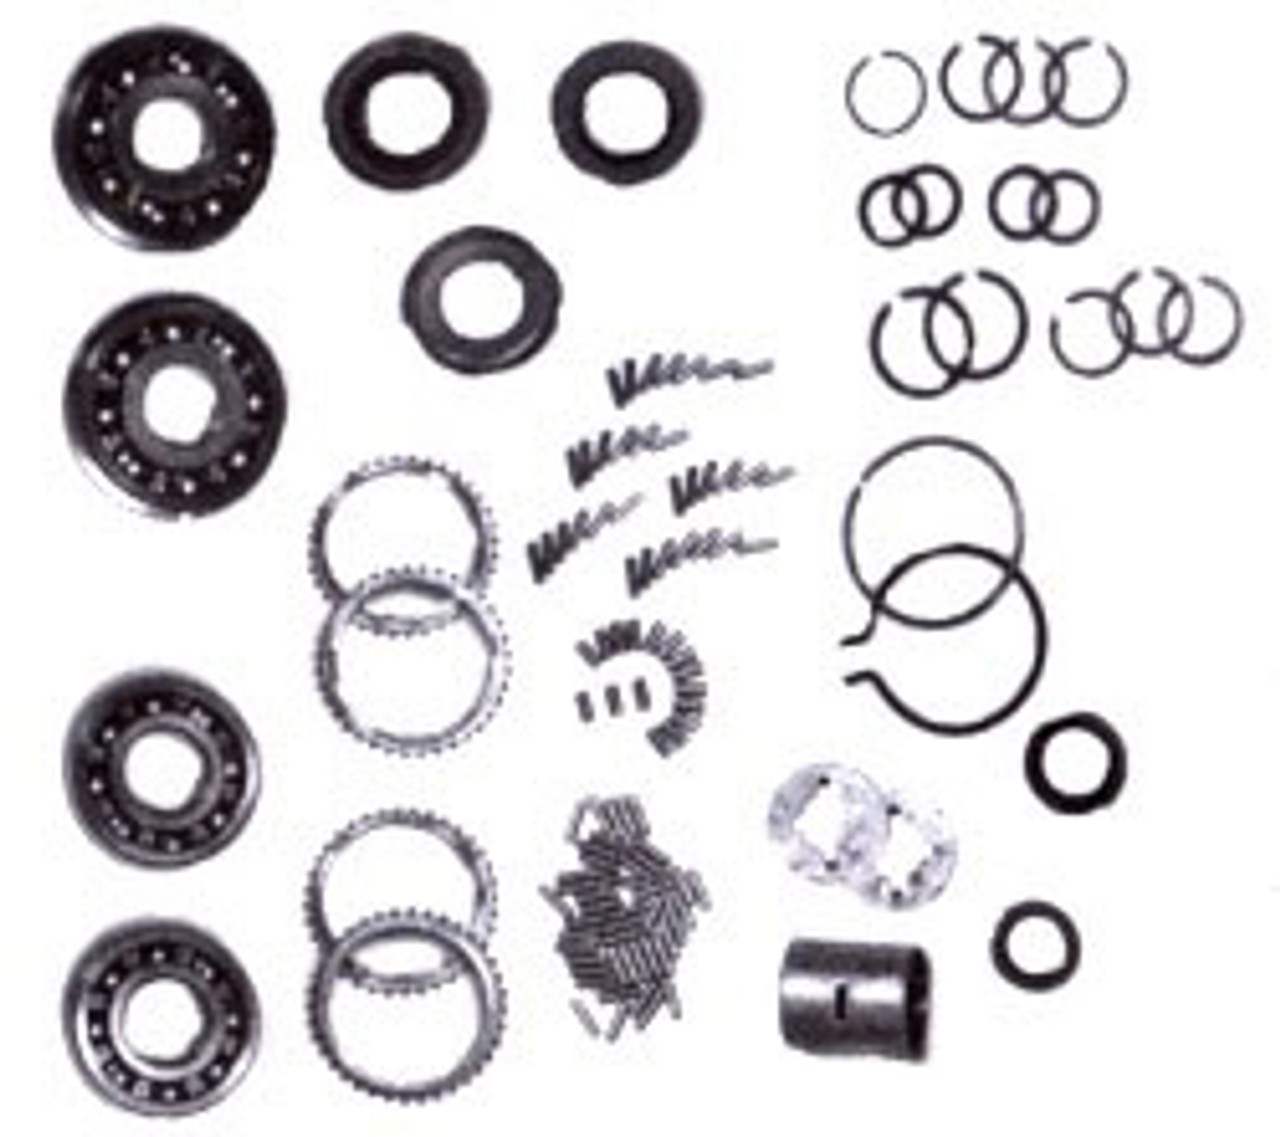 4 Speed Trans Rebuilding Kit for 69 and Older Dodge and Plymouth 23 spline